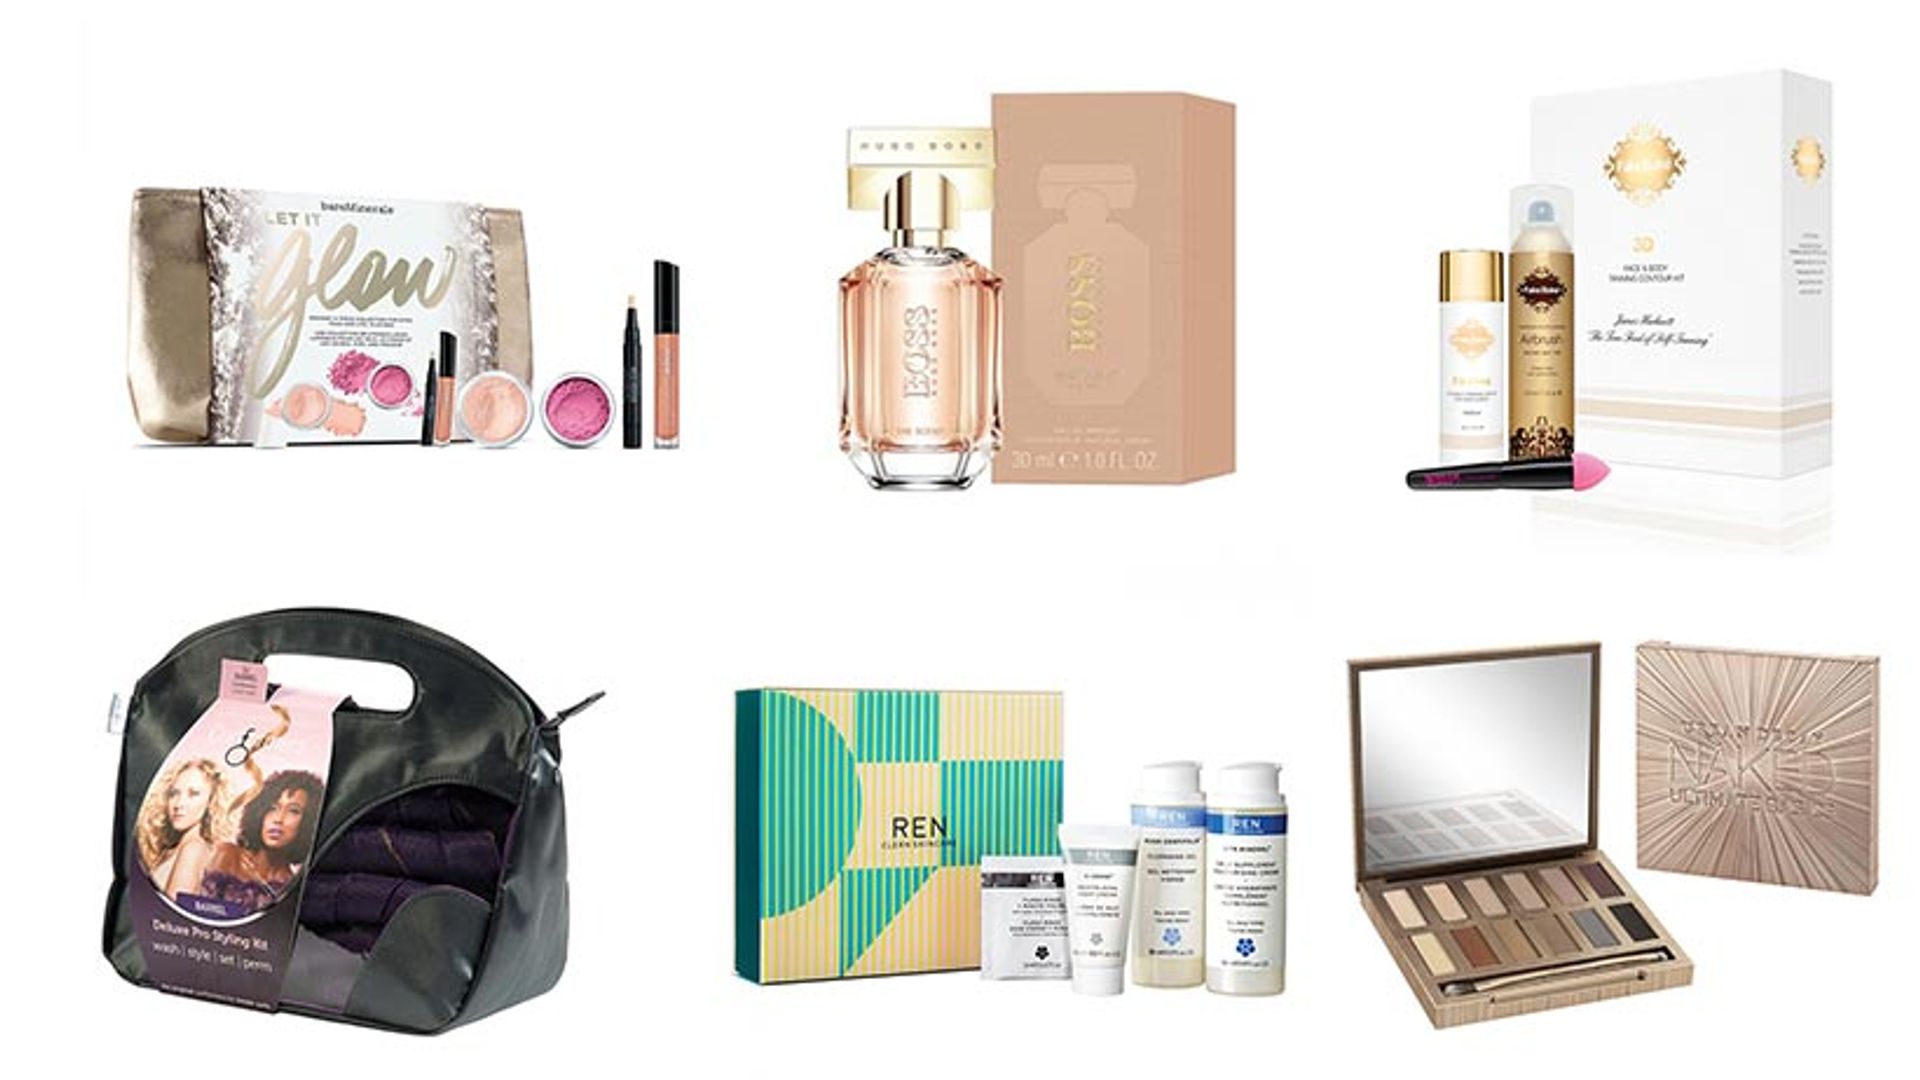 Our must-have beauty products of the week